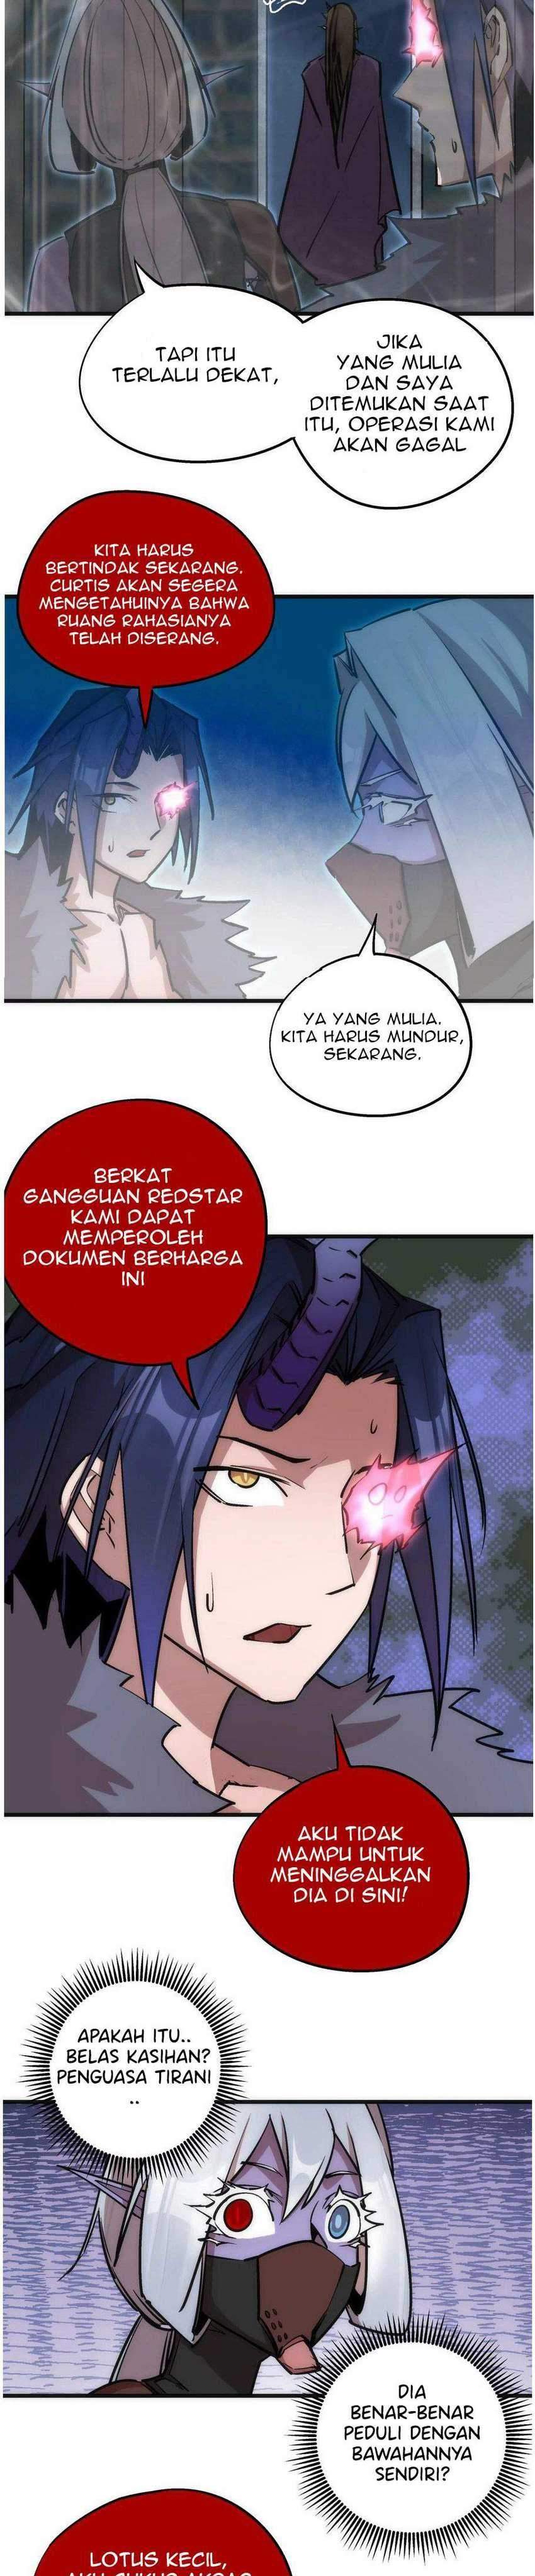 I’m Not The Overlord Chapter 51